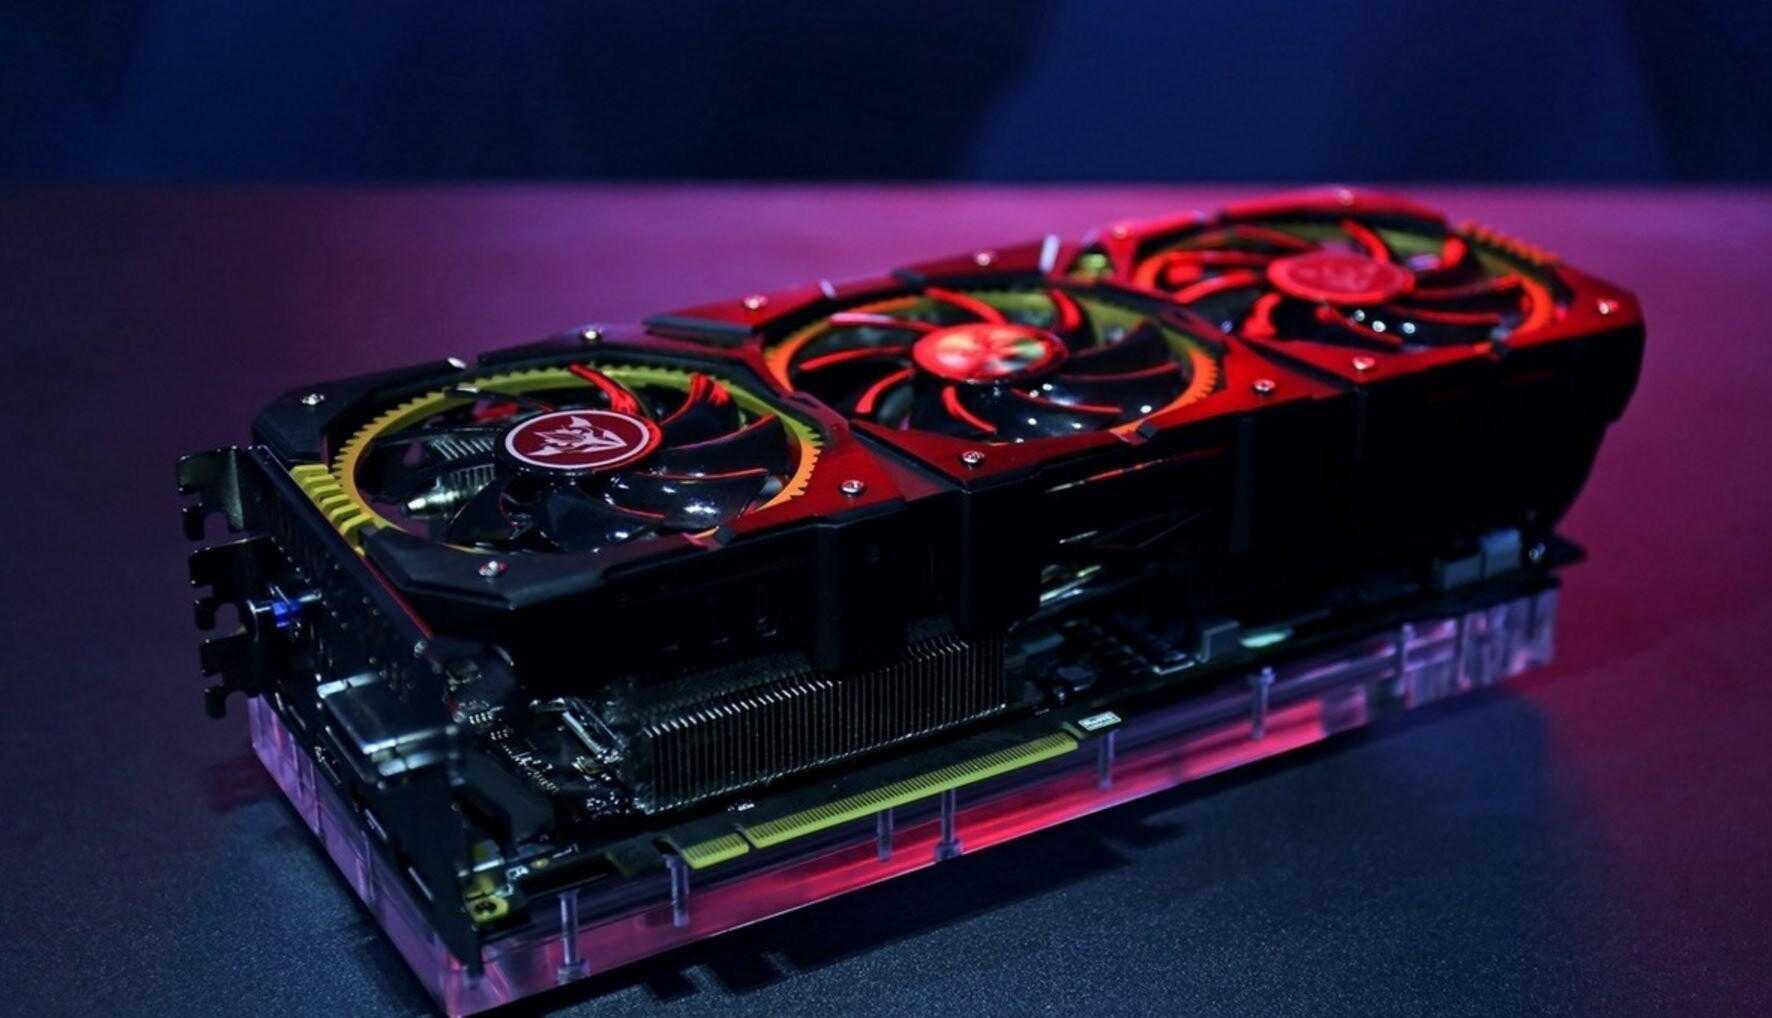 Comparison of popular video cards for a gaming computer